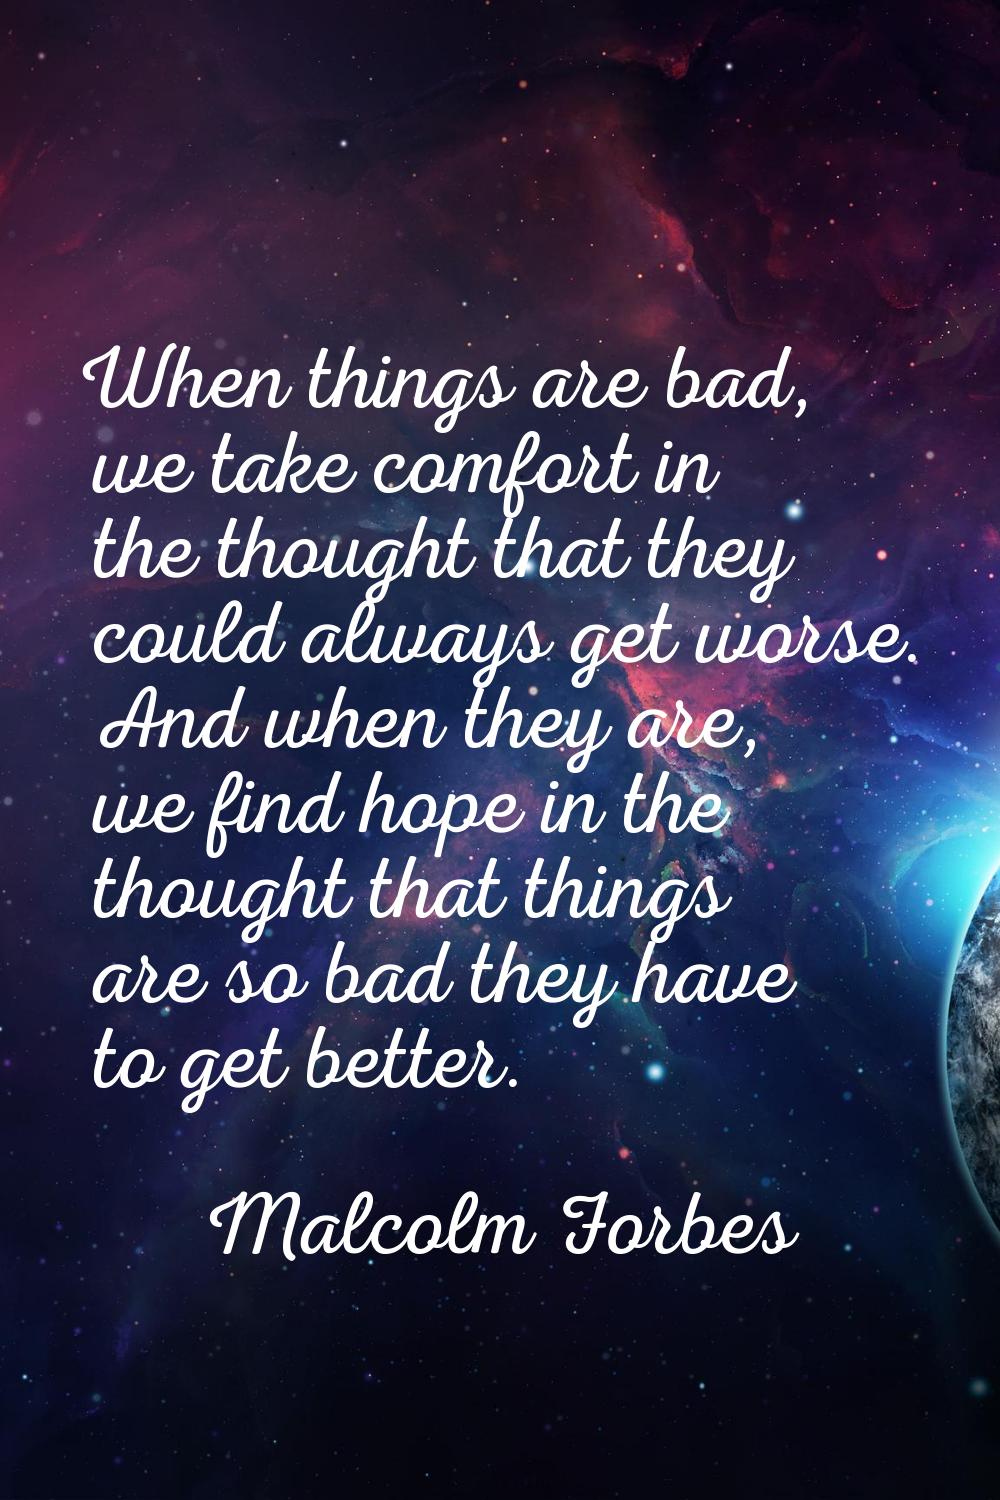 When things are bad, we take comfort in the thought that they could always get worse. And when they